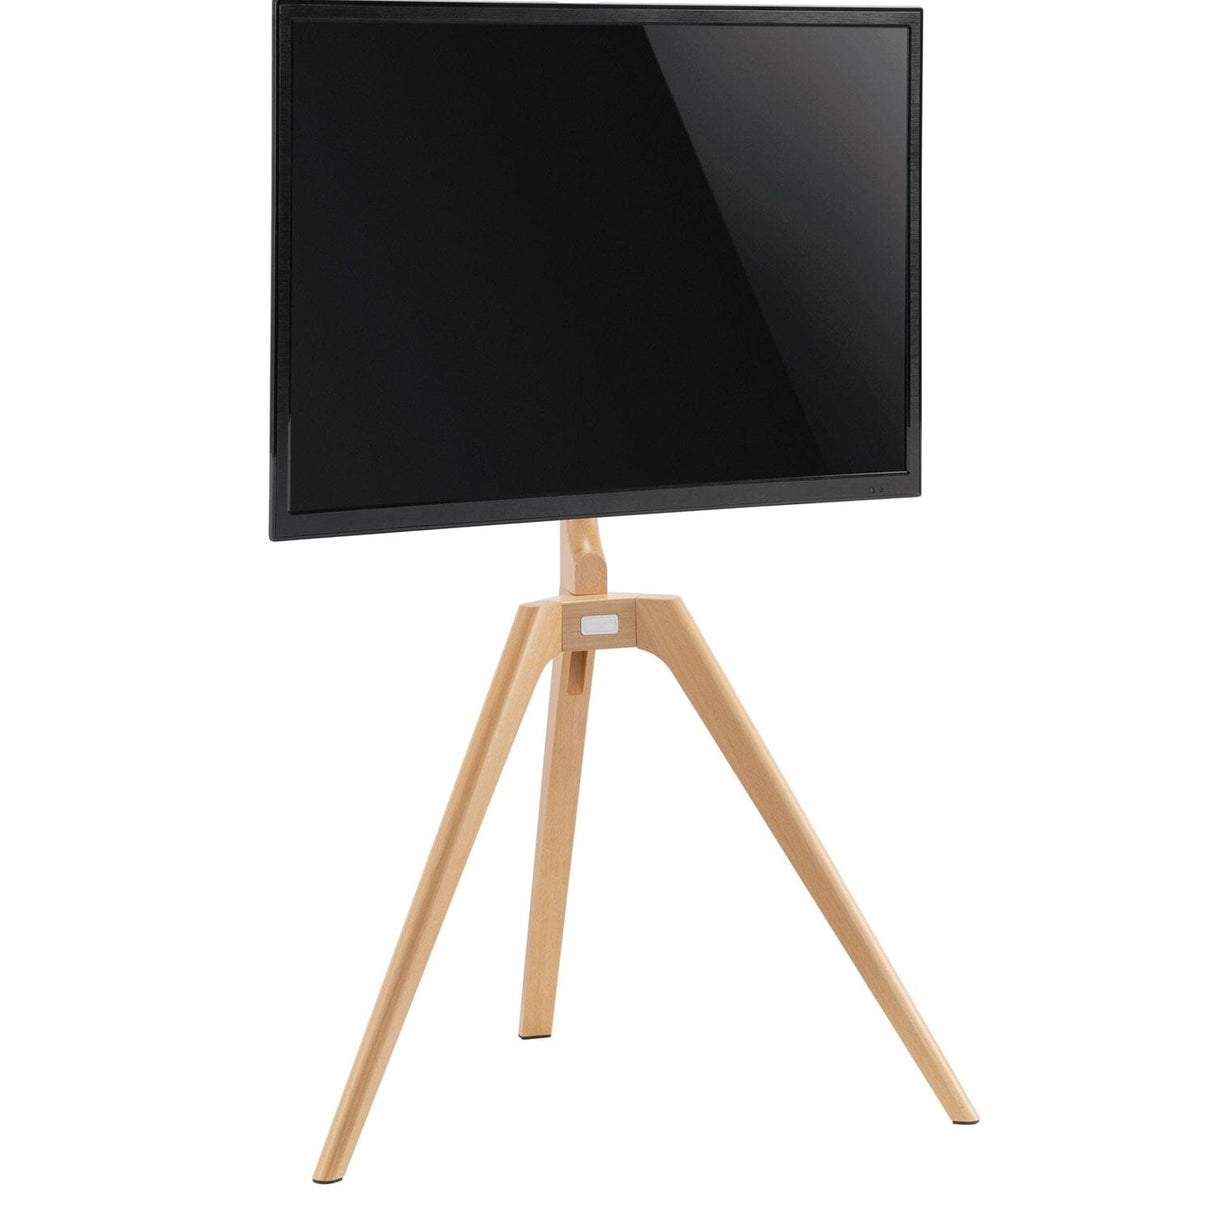 TTAP Tripod Oak TV Stand with Swivel for up to 65" TVs